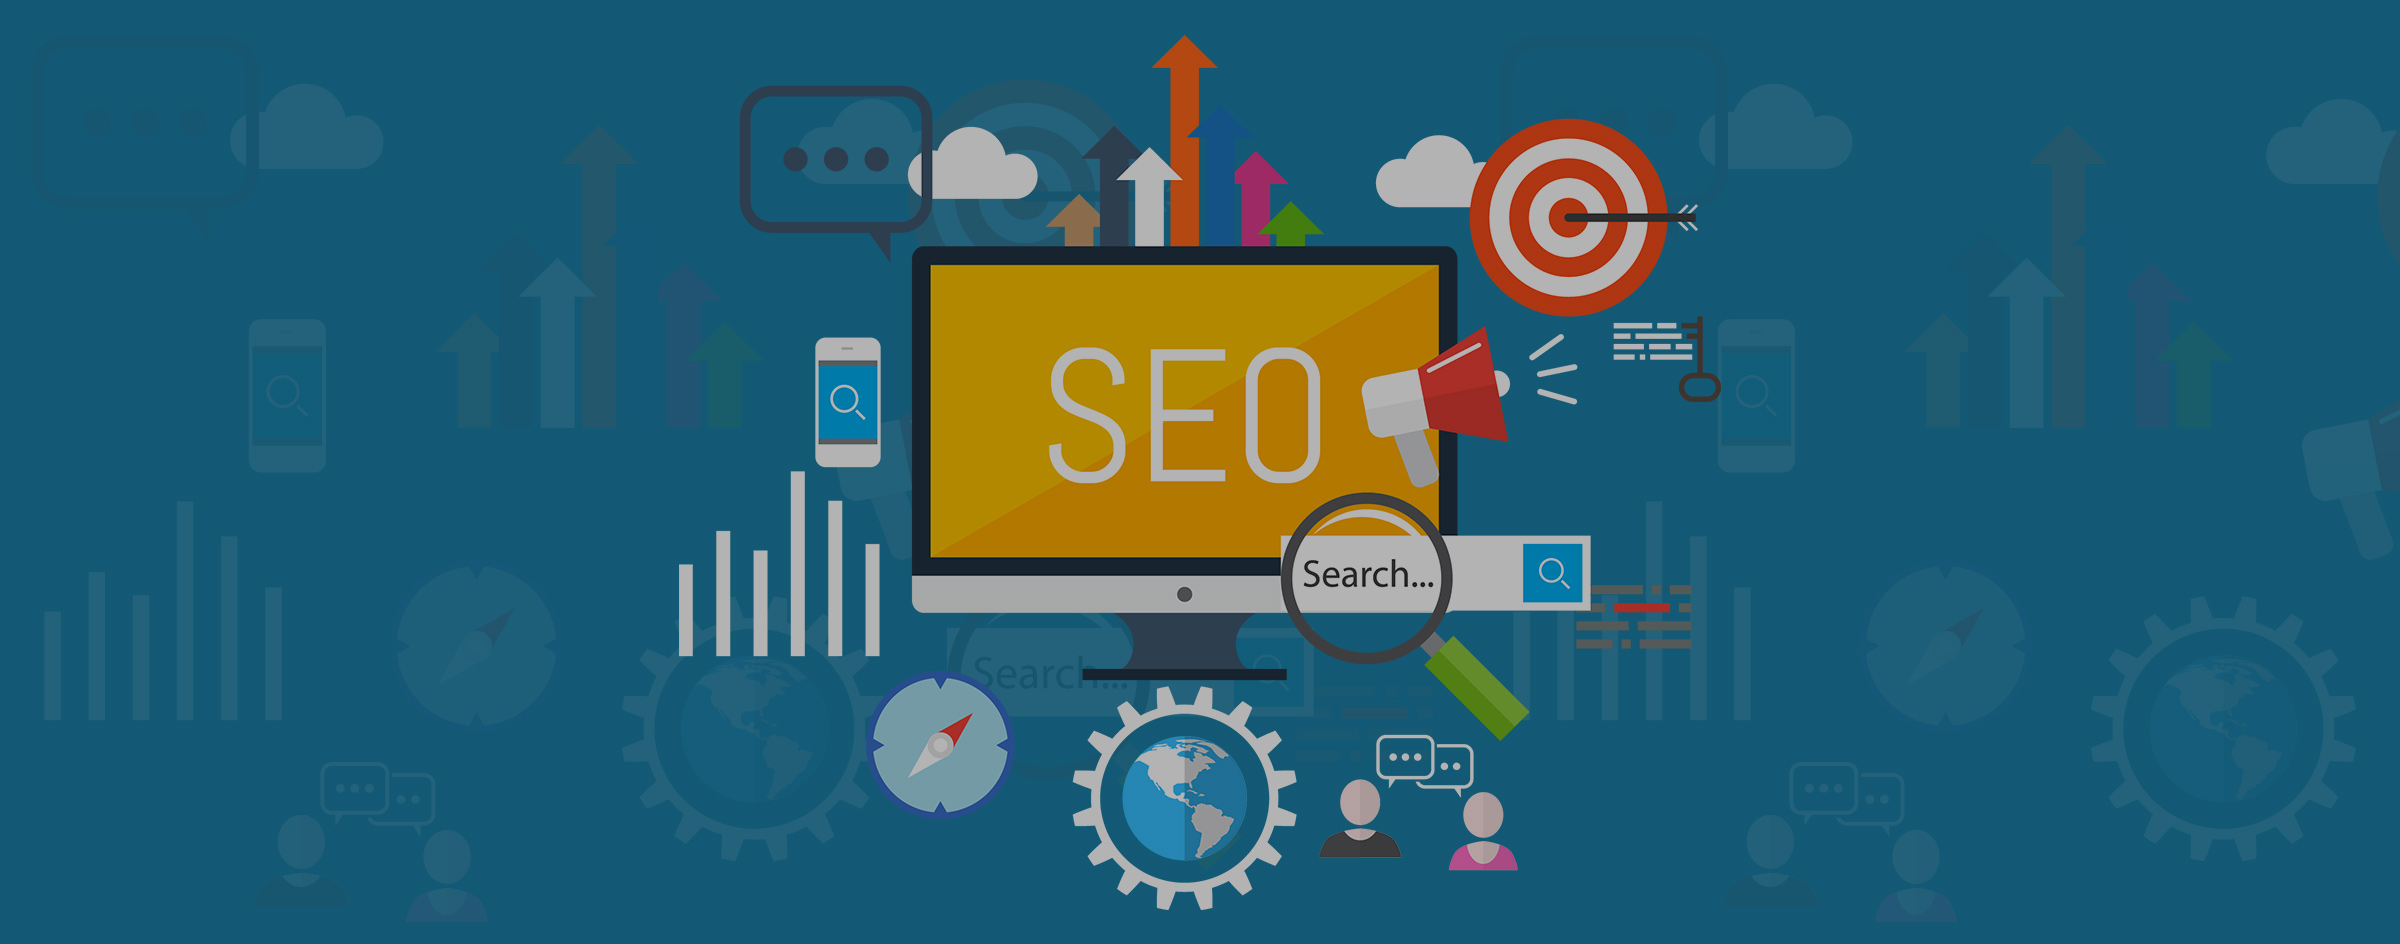 6 SEO myths clients should be aware of